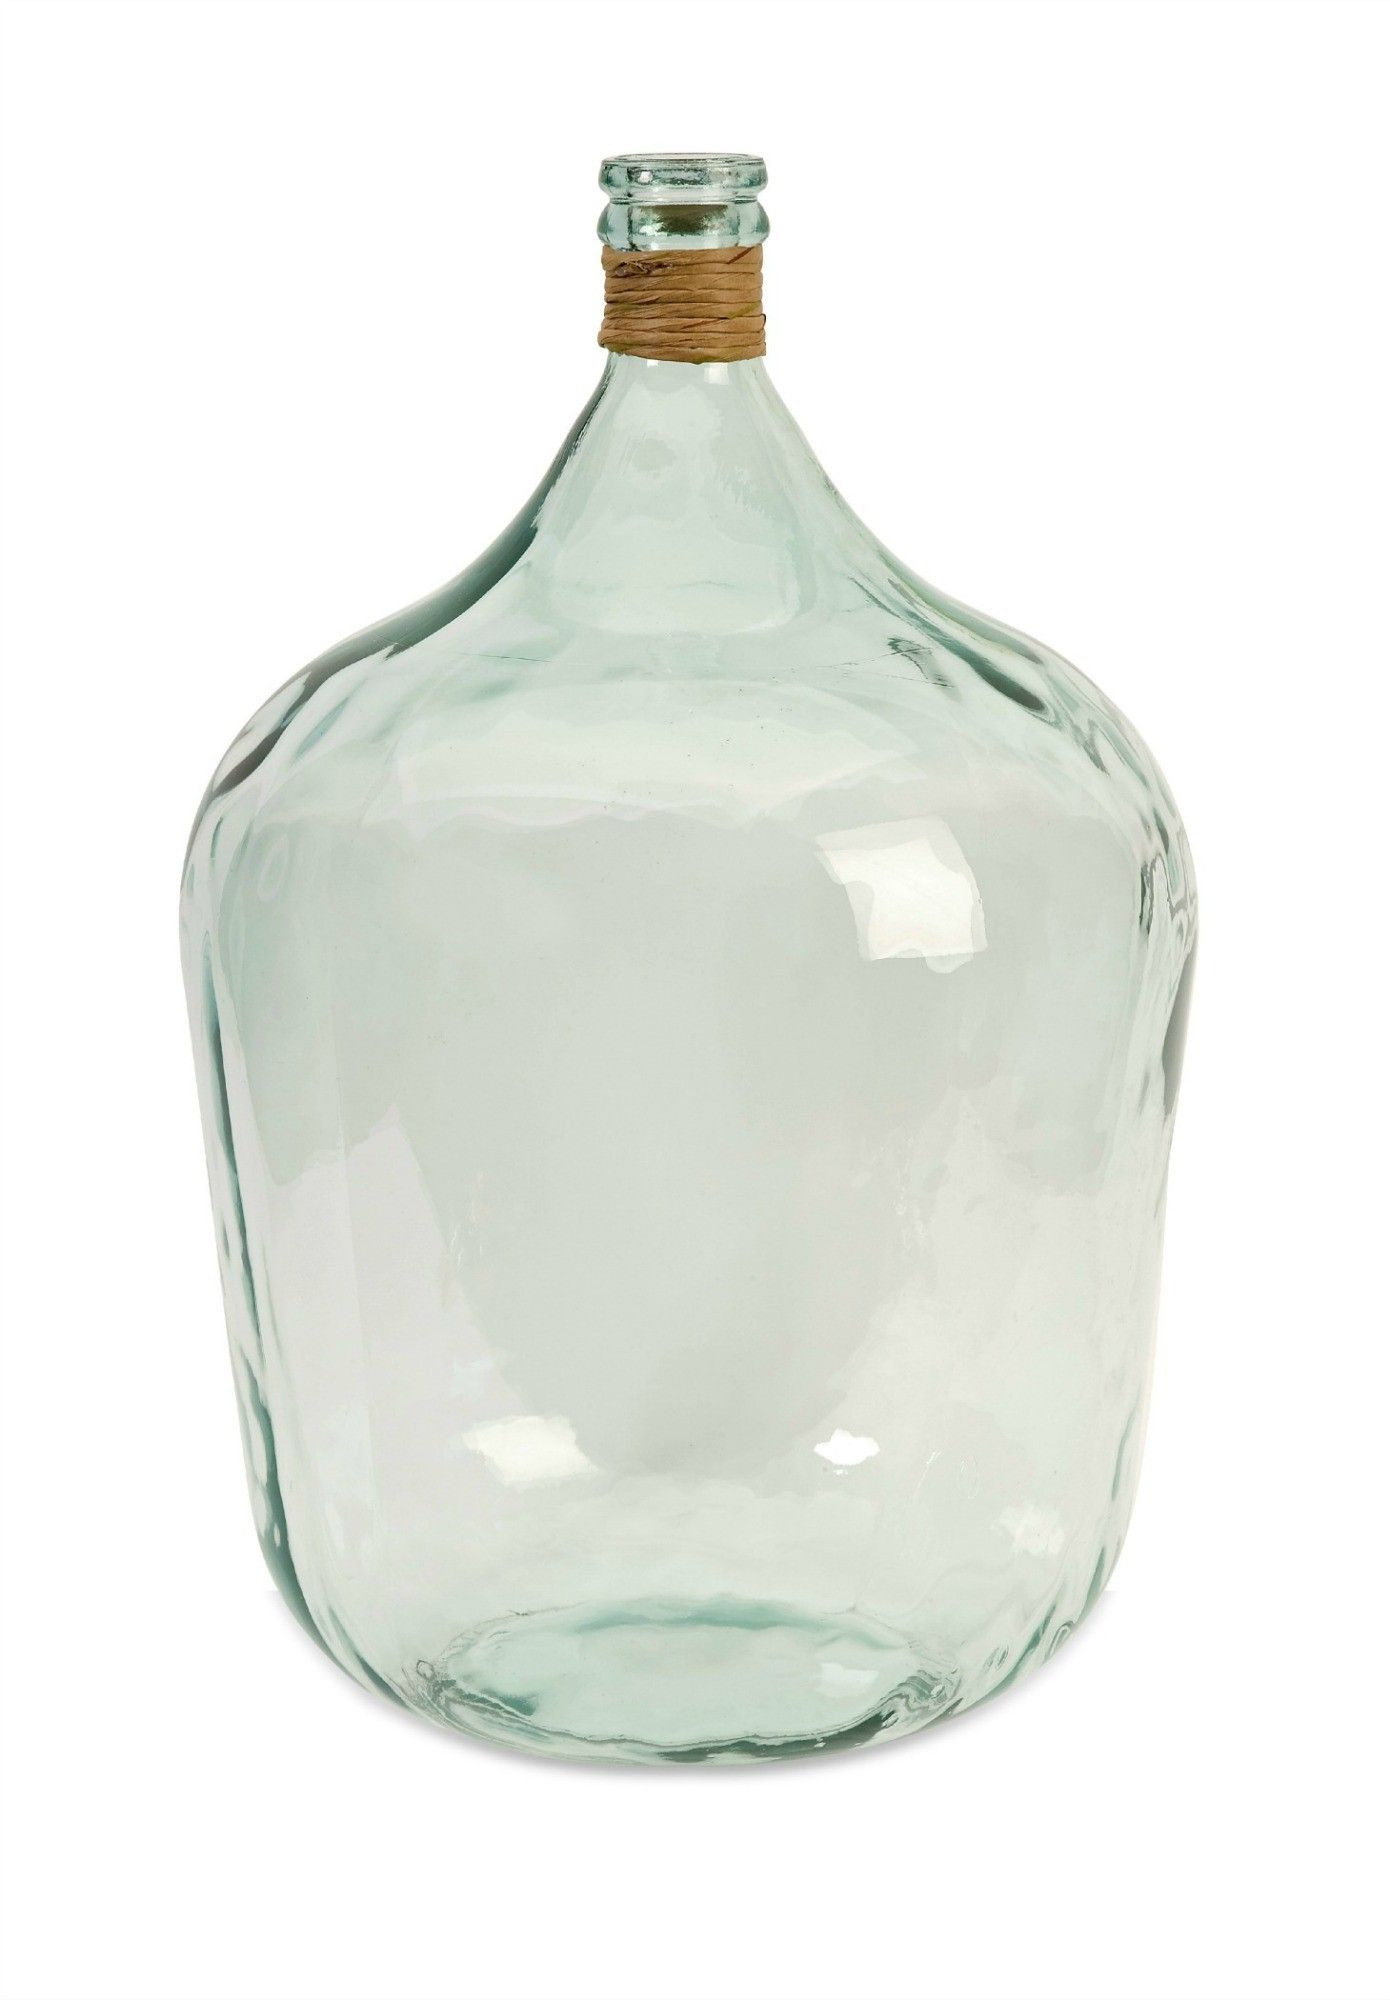 22 Wonderful Recycled Glass Bottle Vase 2024 free download recycled glass bottle vase of boccioni large recycled glass jug would be pretty filled with pertaining to boccioni large recycled glass jug would be pretty filled with beach glass finds